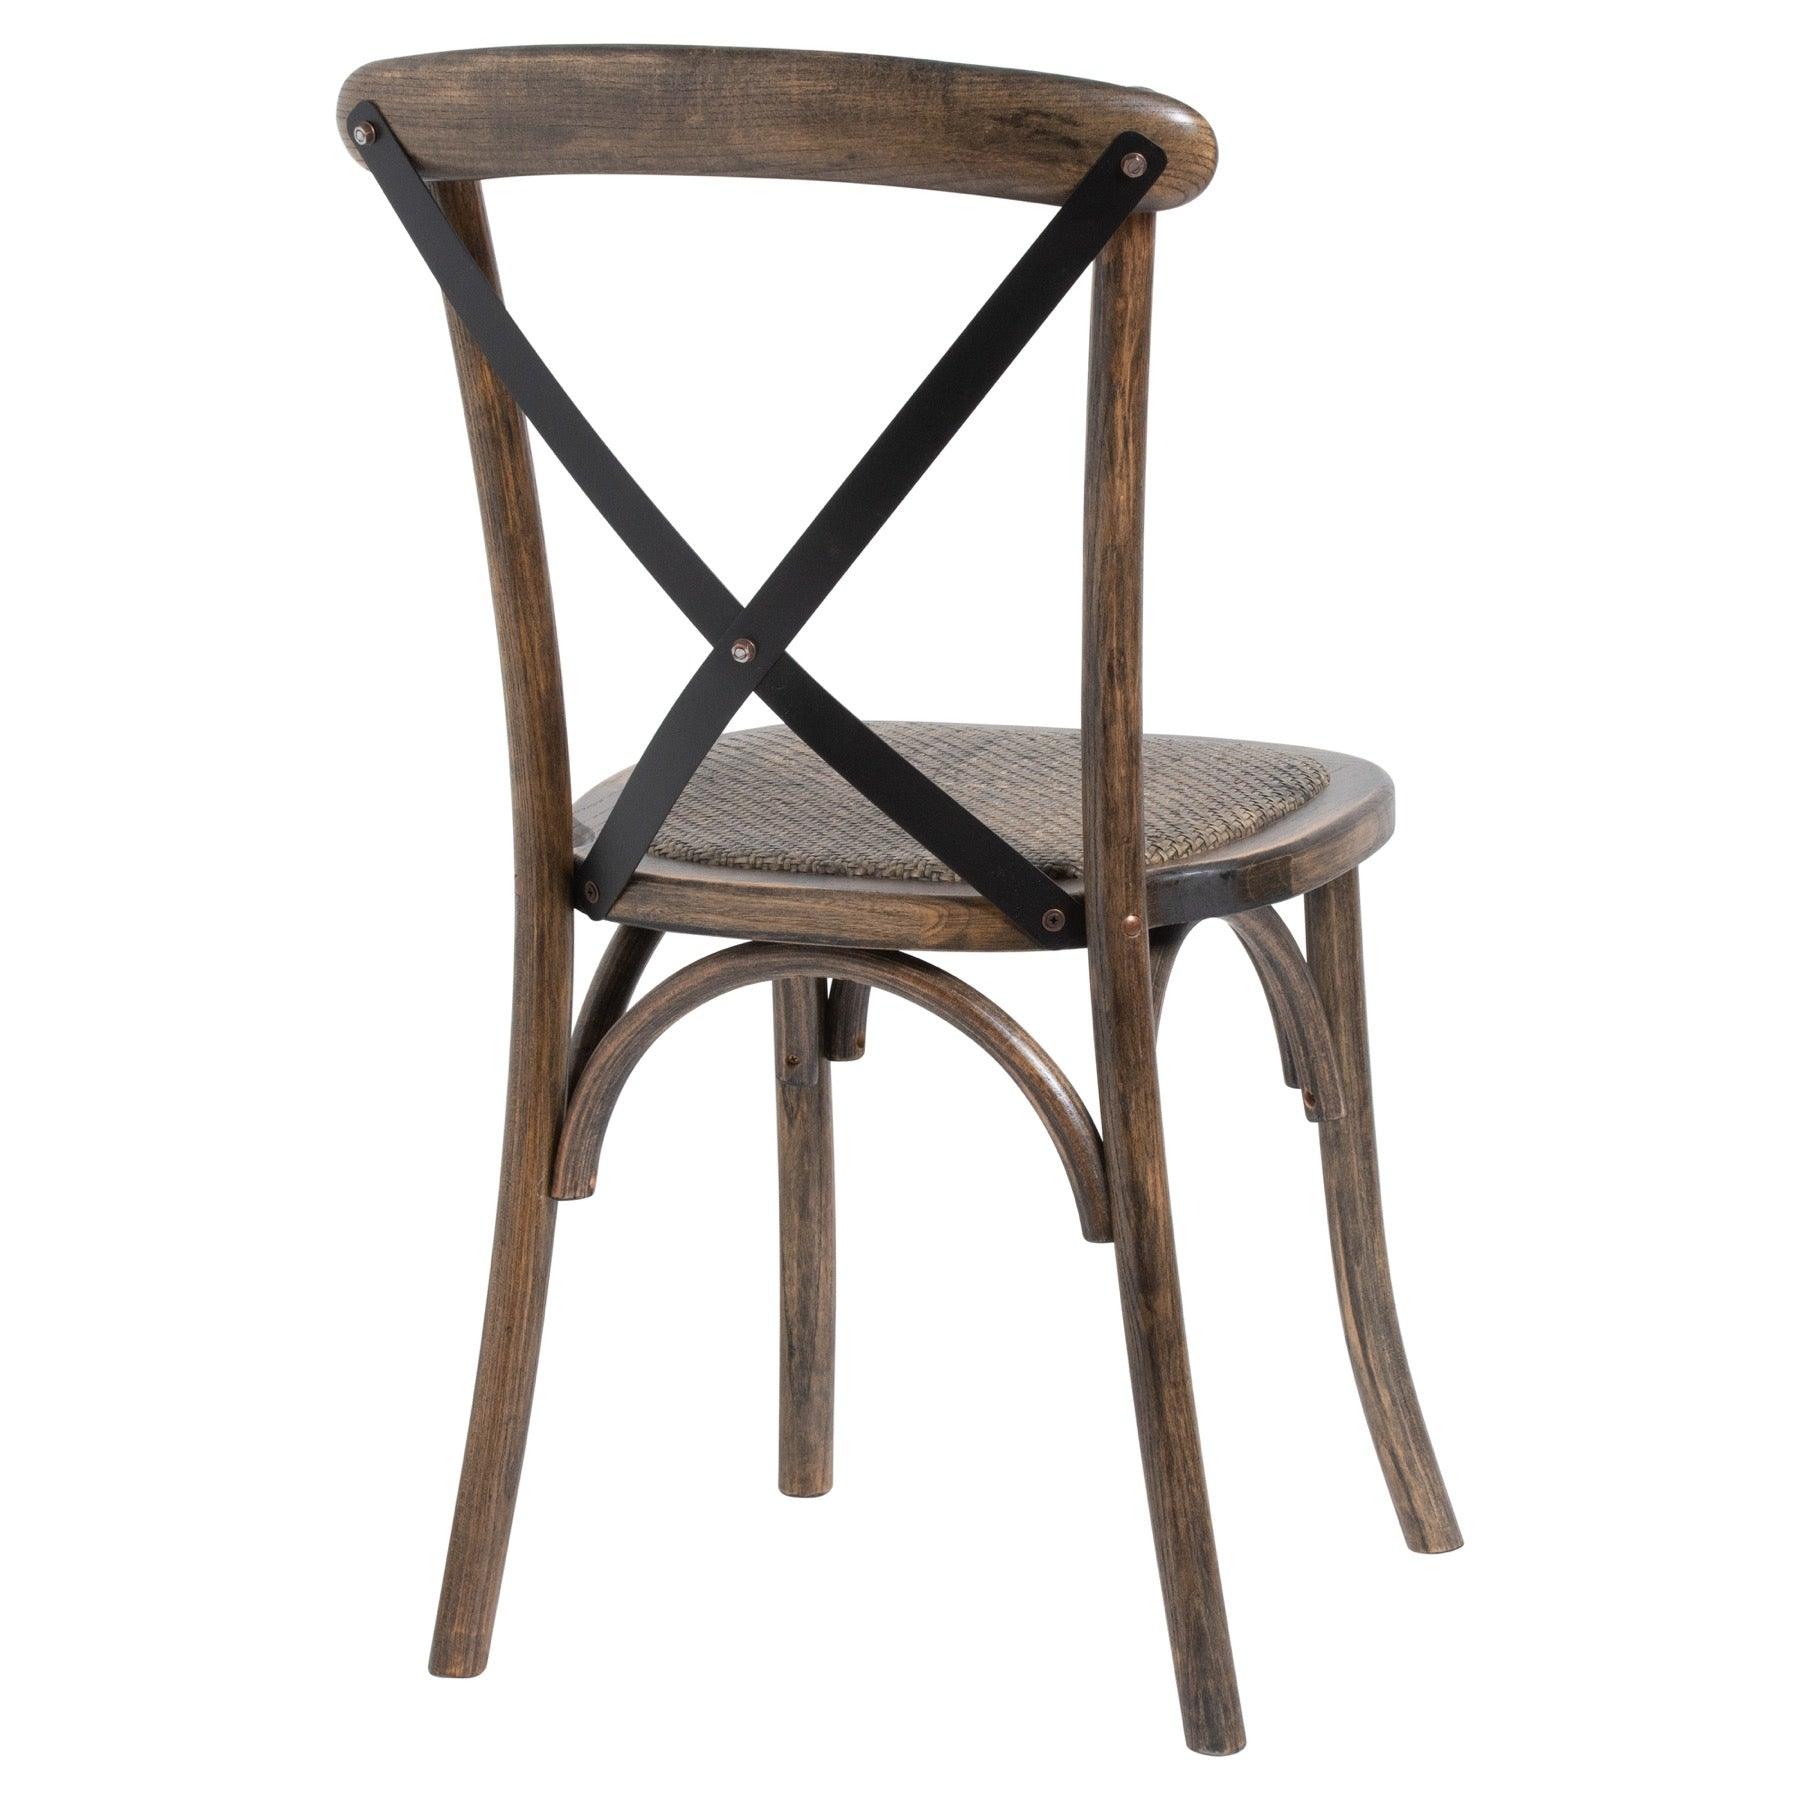 Oak Cross Back Dining Chair - Vookoo Lifestyle